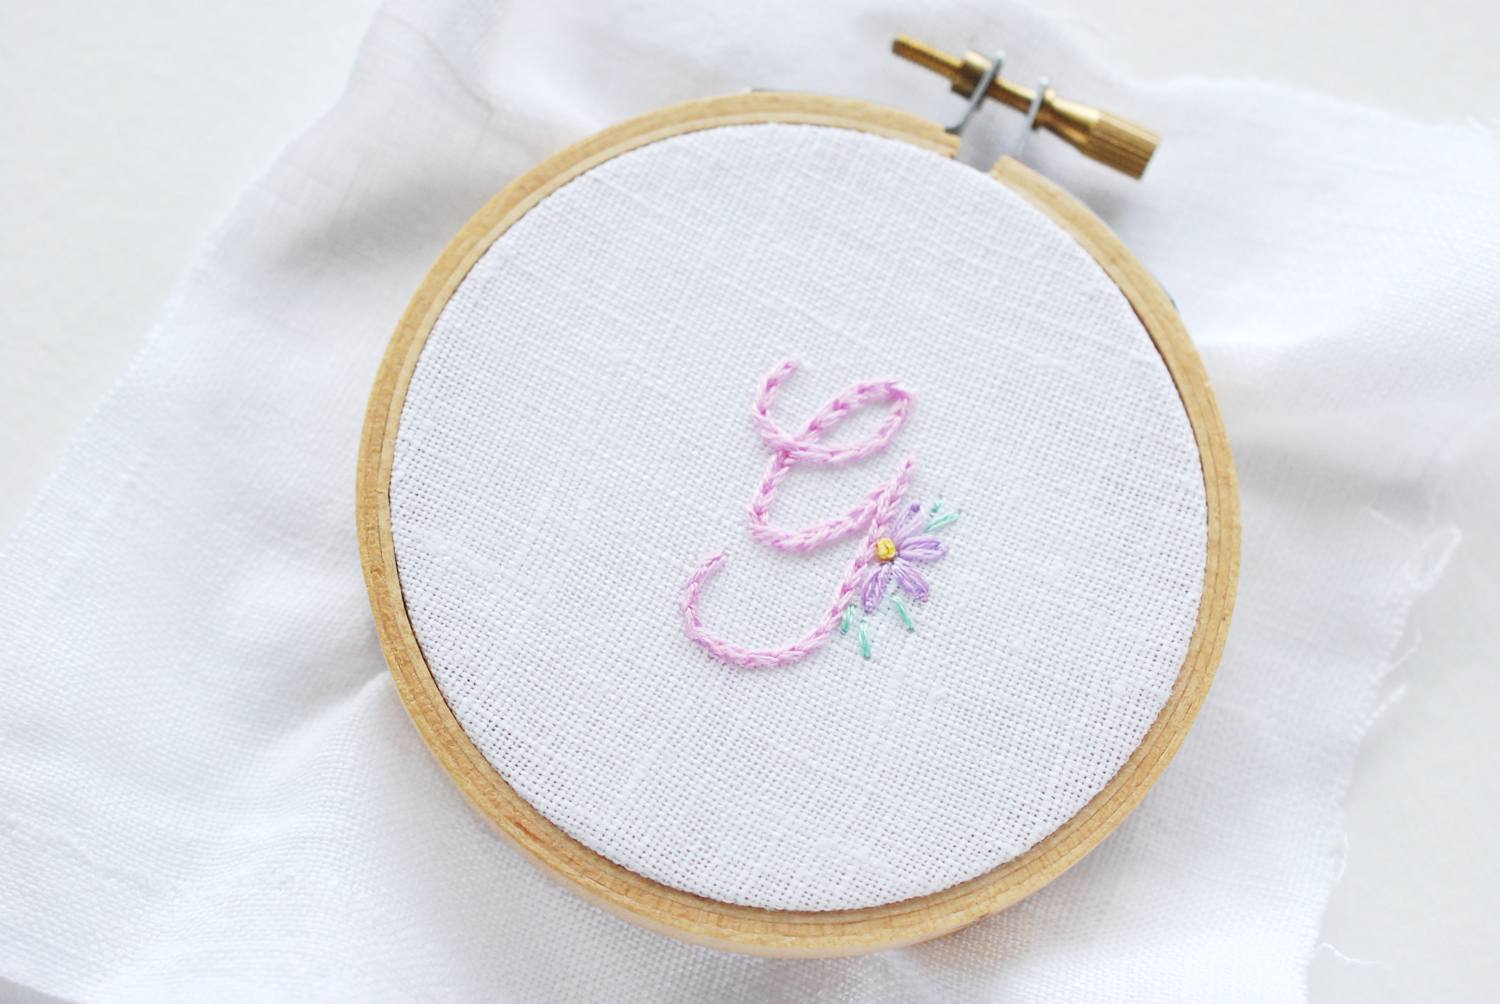 Hand Embroidery Monogram Patterns Free Alphabet Pattern For Monogram Embroidery